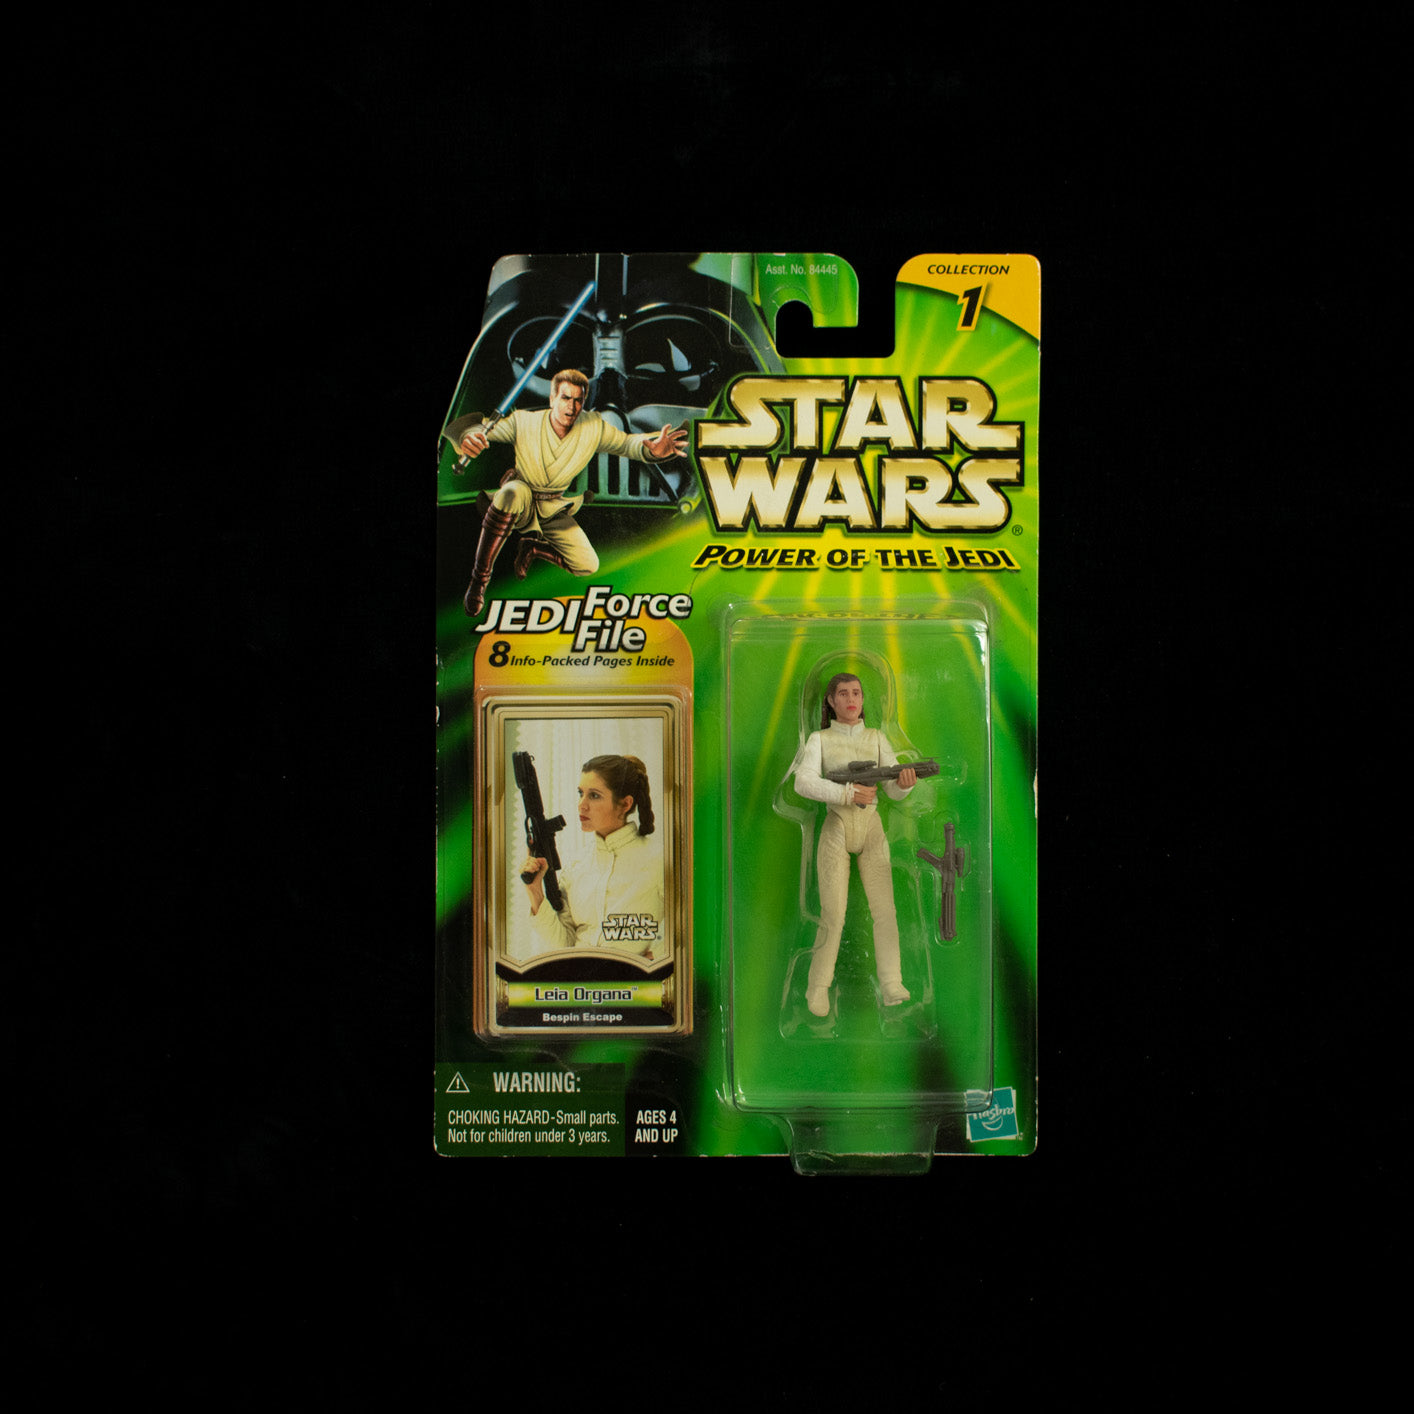 Star Wars Power of the Jedi Action Figure Leia Organa